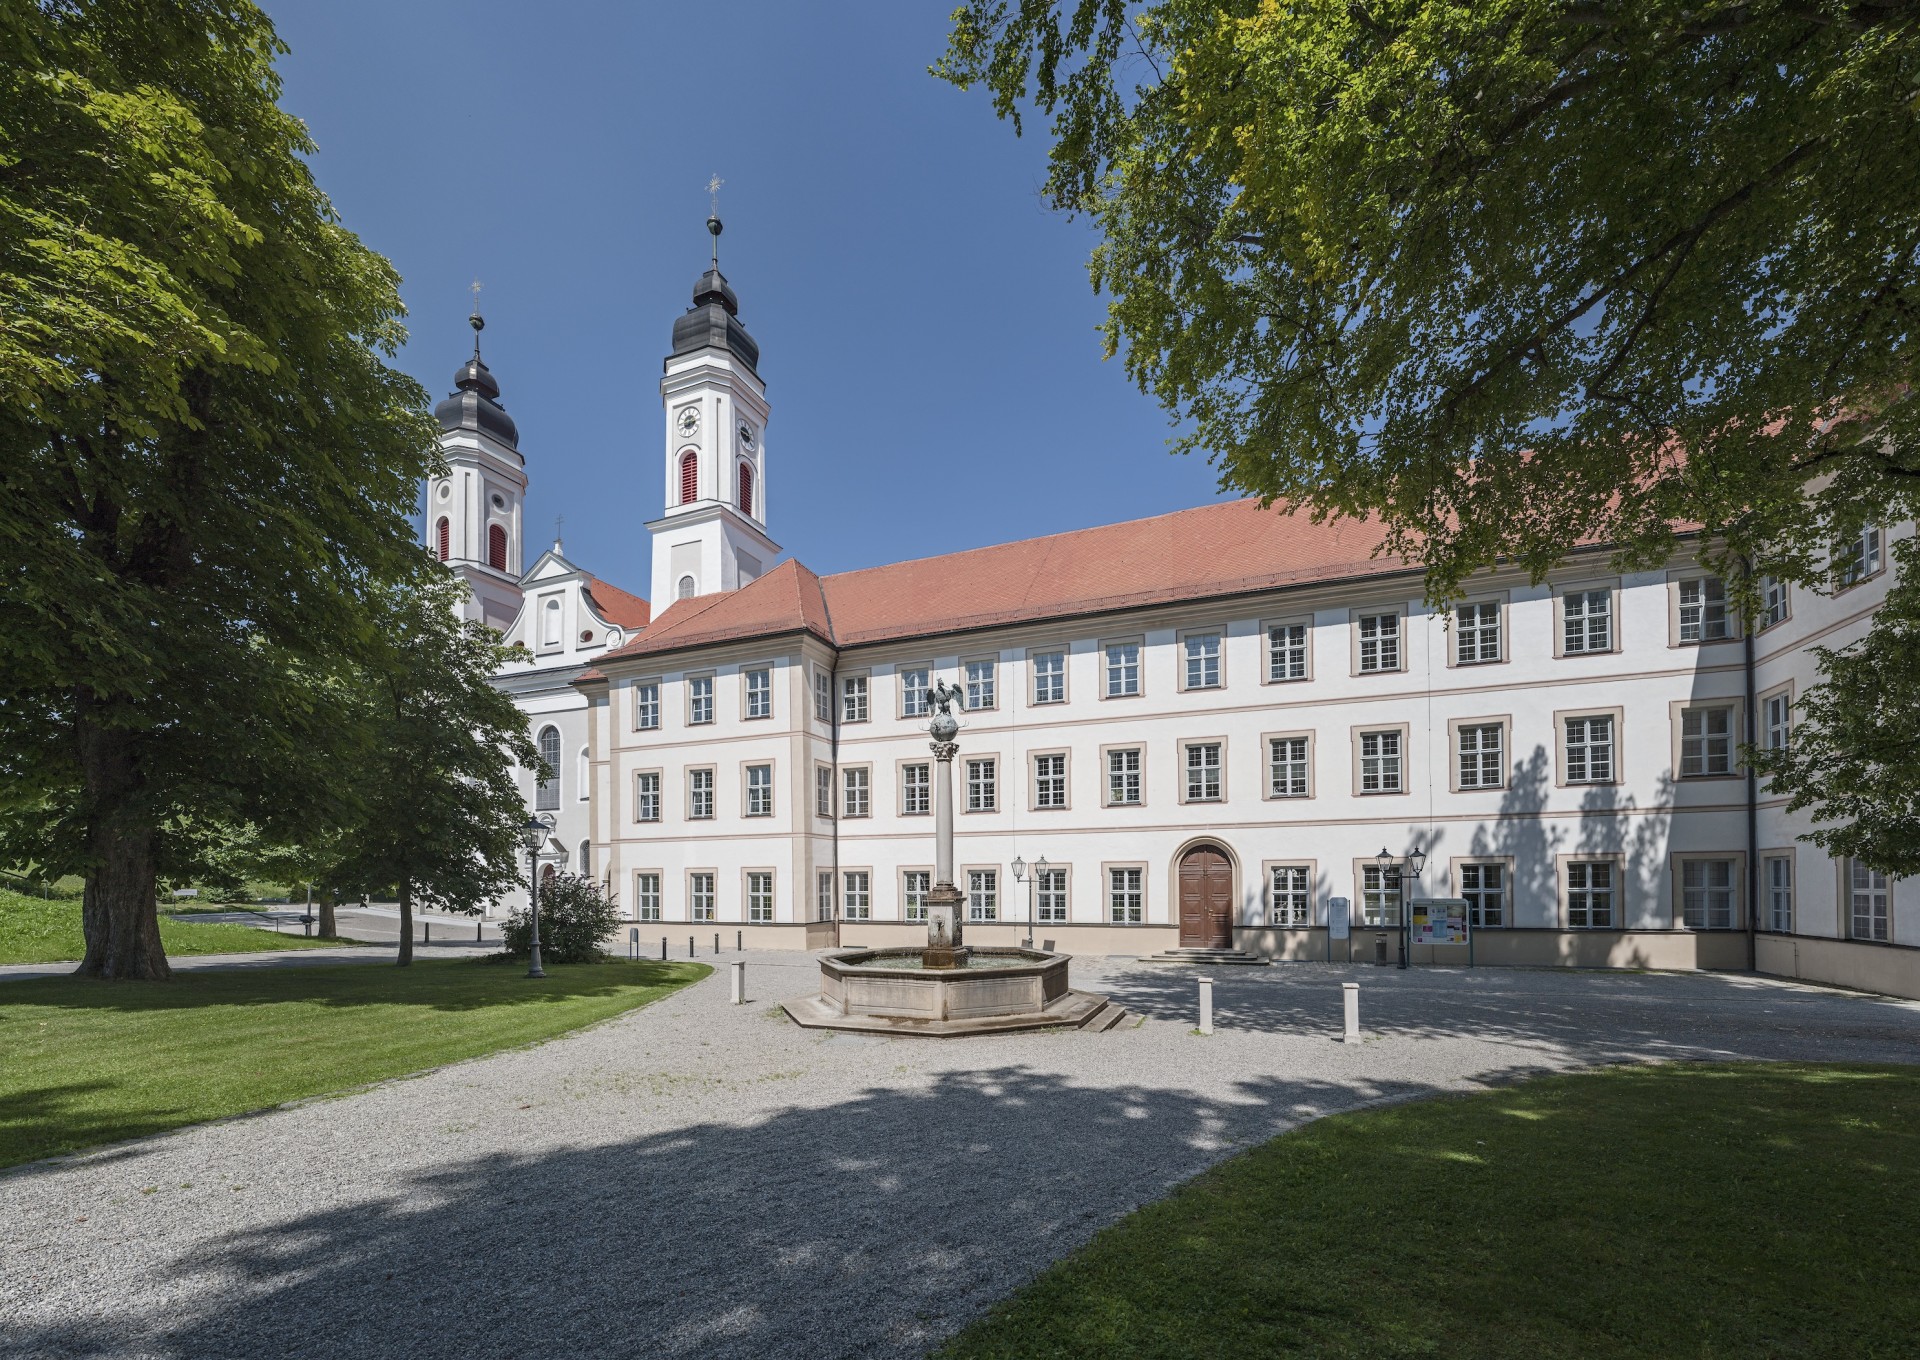 87660 Kloster Irsee - Haupteingang